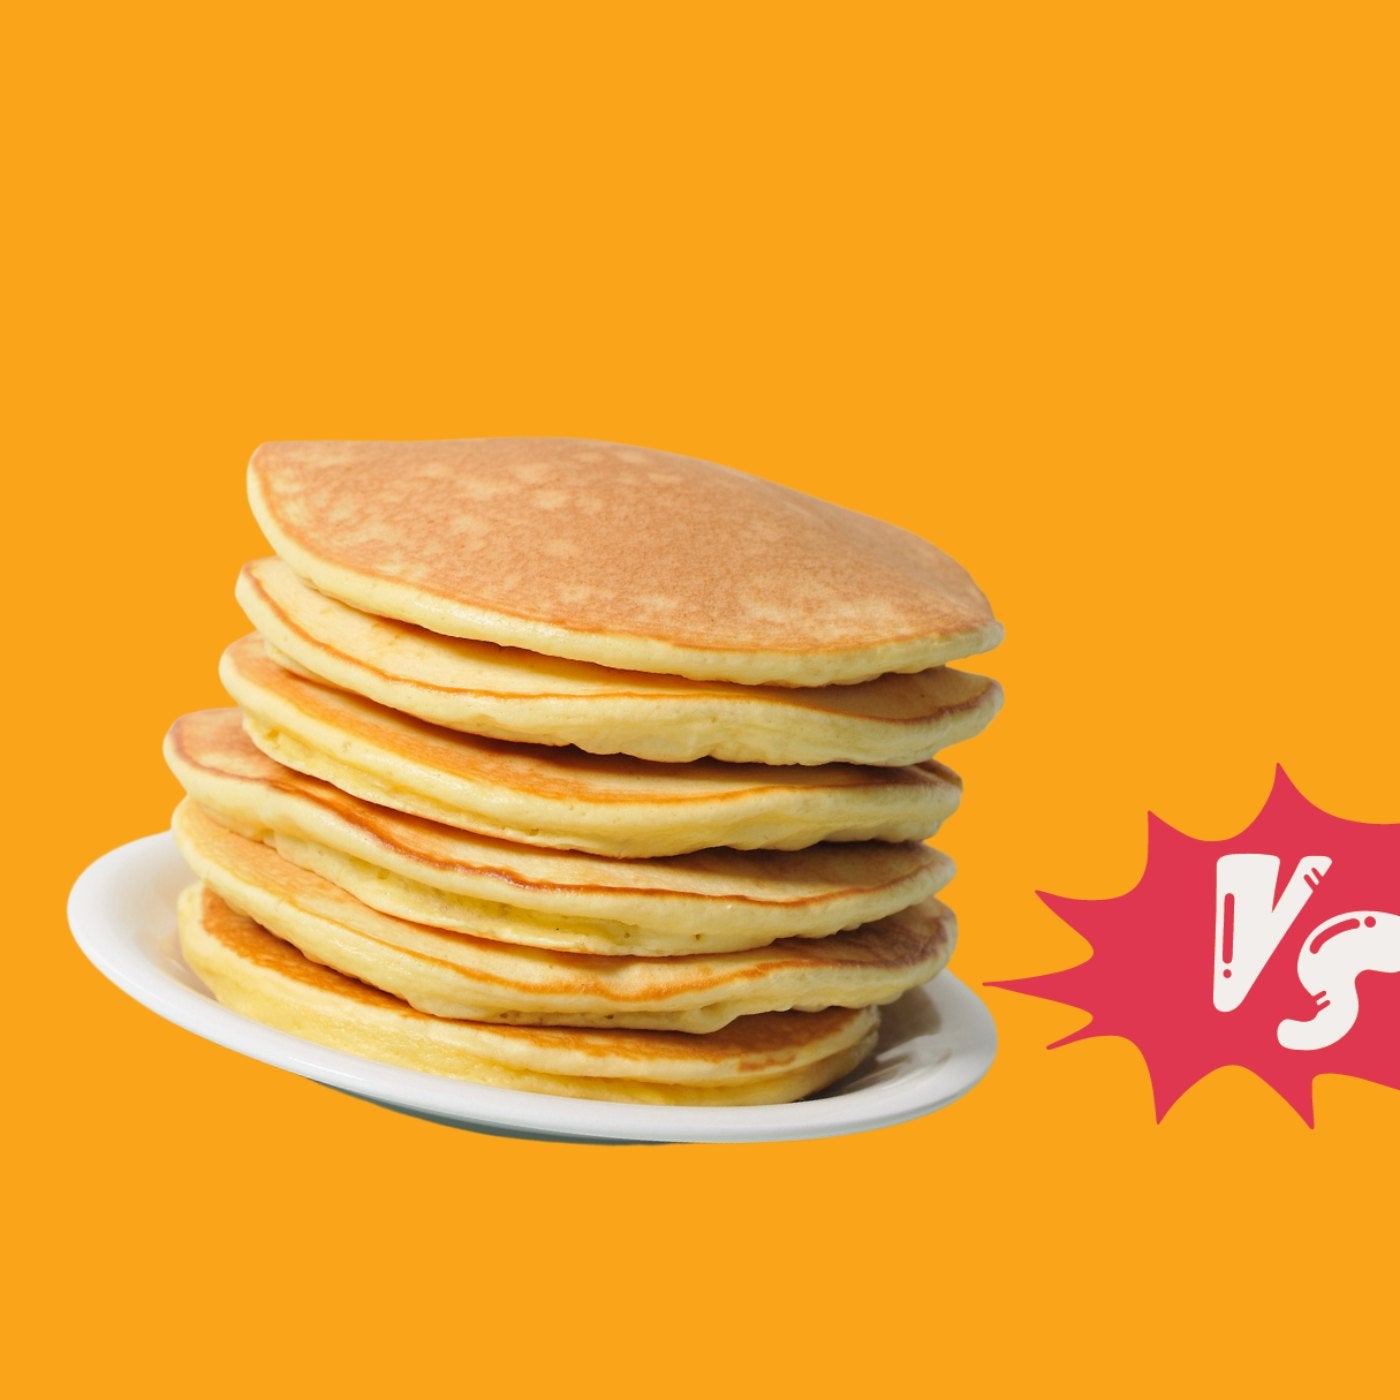 Are Pancakes Just Vessels for Toppings?